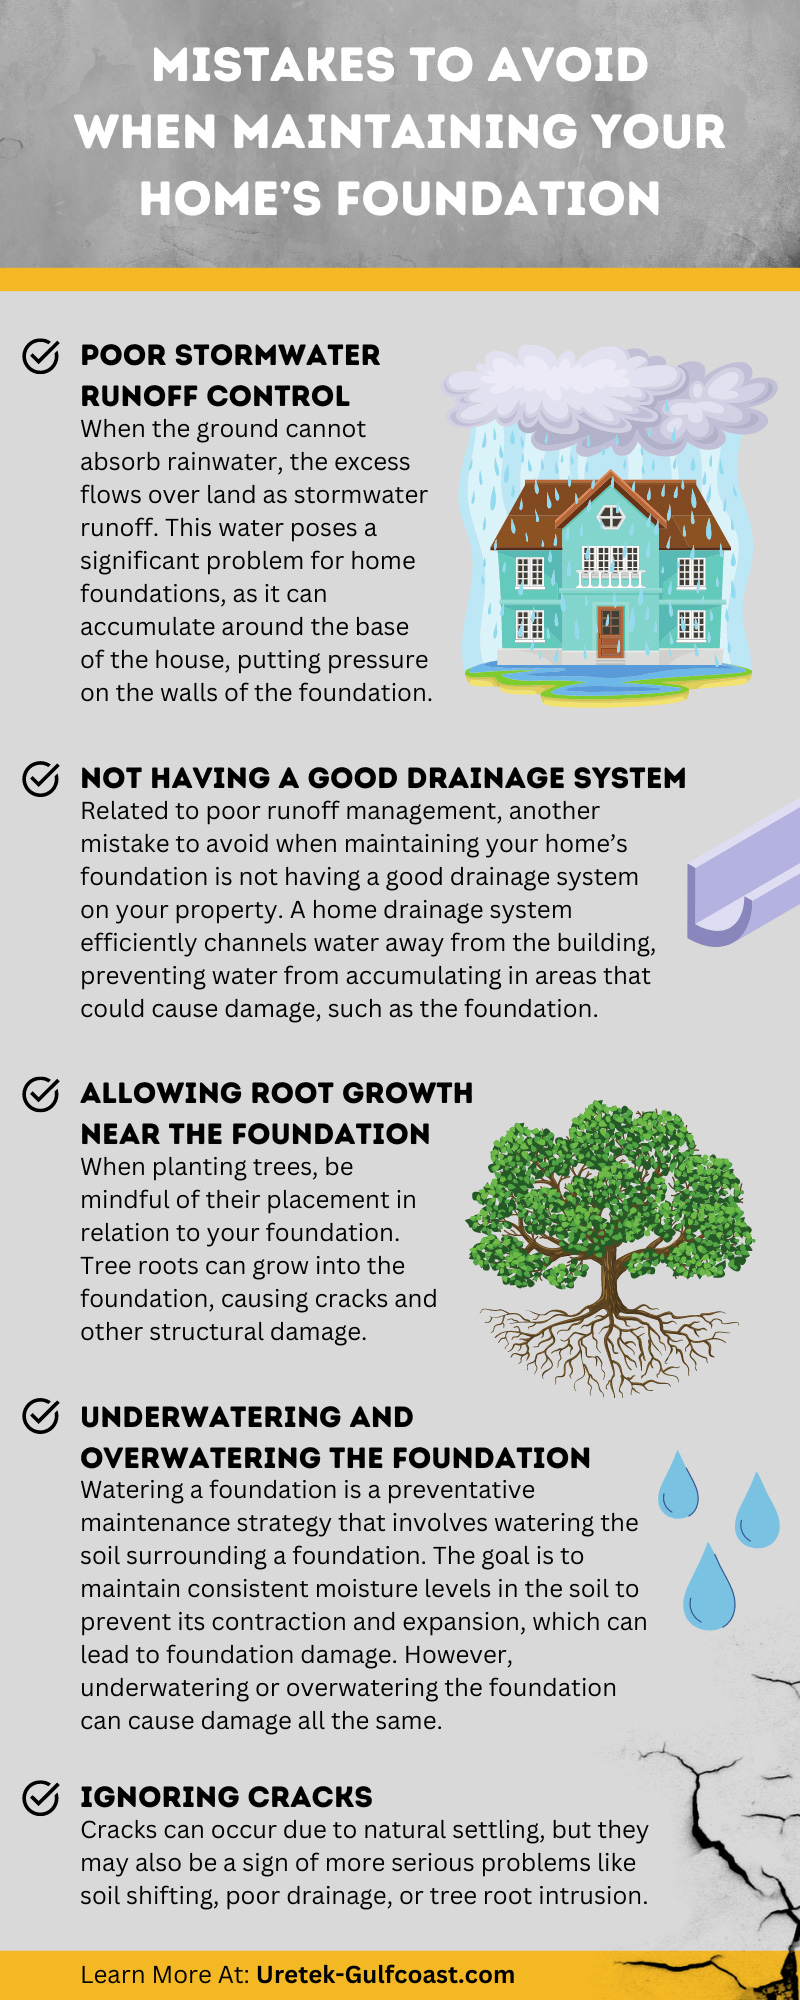 6 Mistakes To Avoid When Maintaining Your Home’s Foundation 